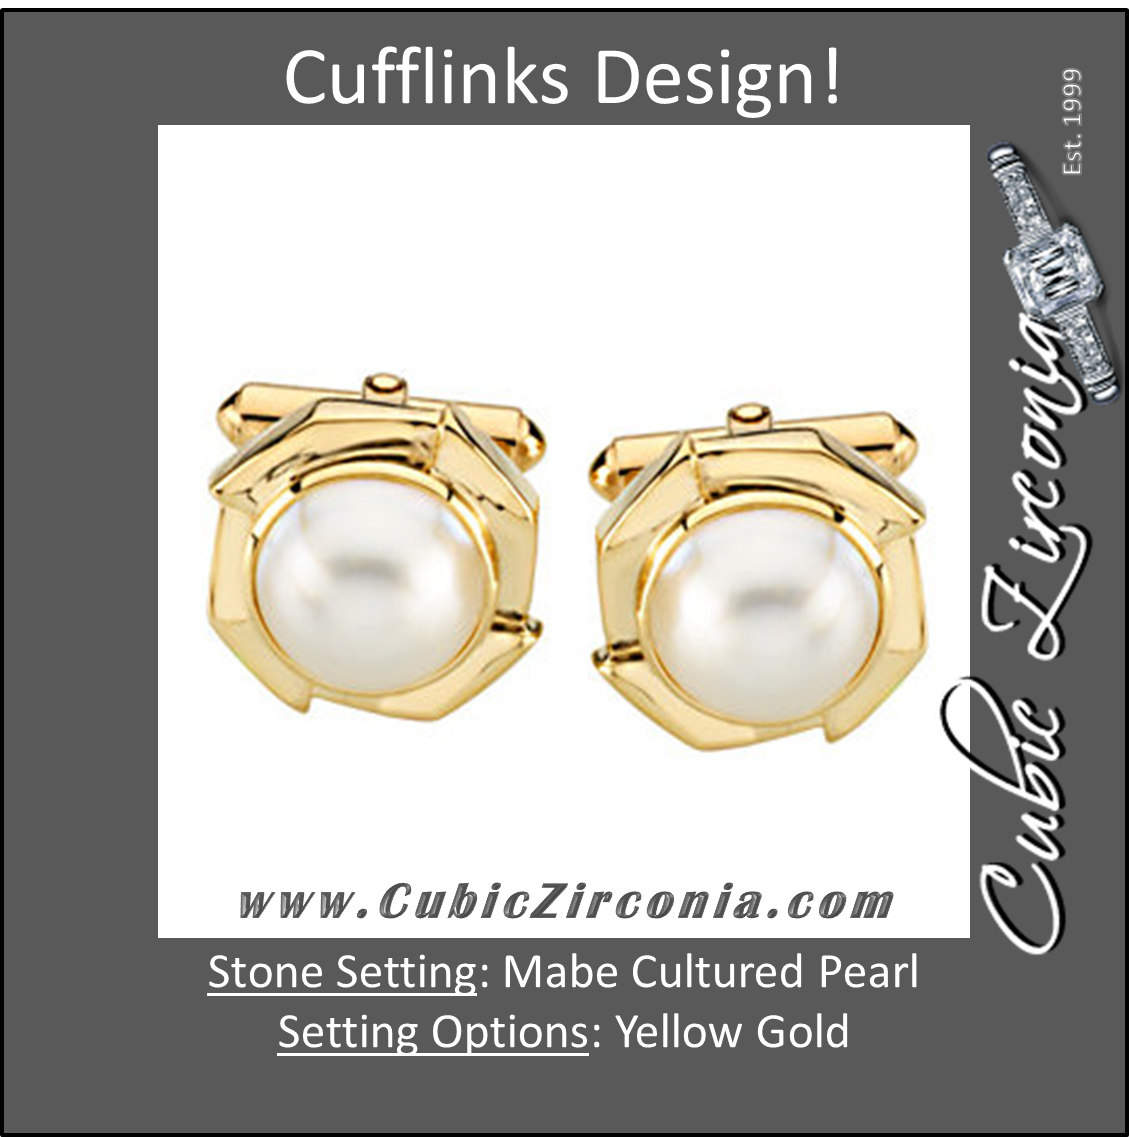 Men’s Cufflinks- 14k Yellow Gold with Mabé Cultured Pearl